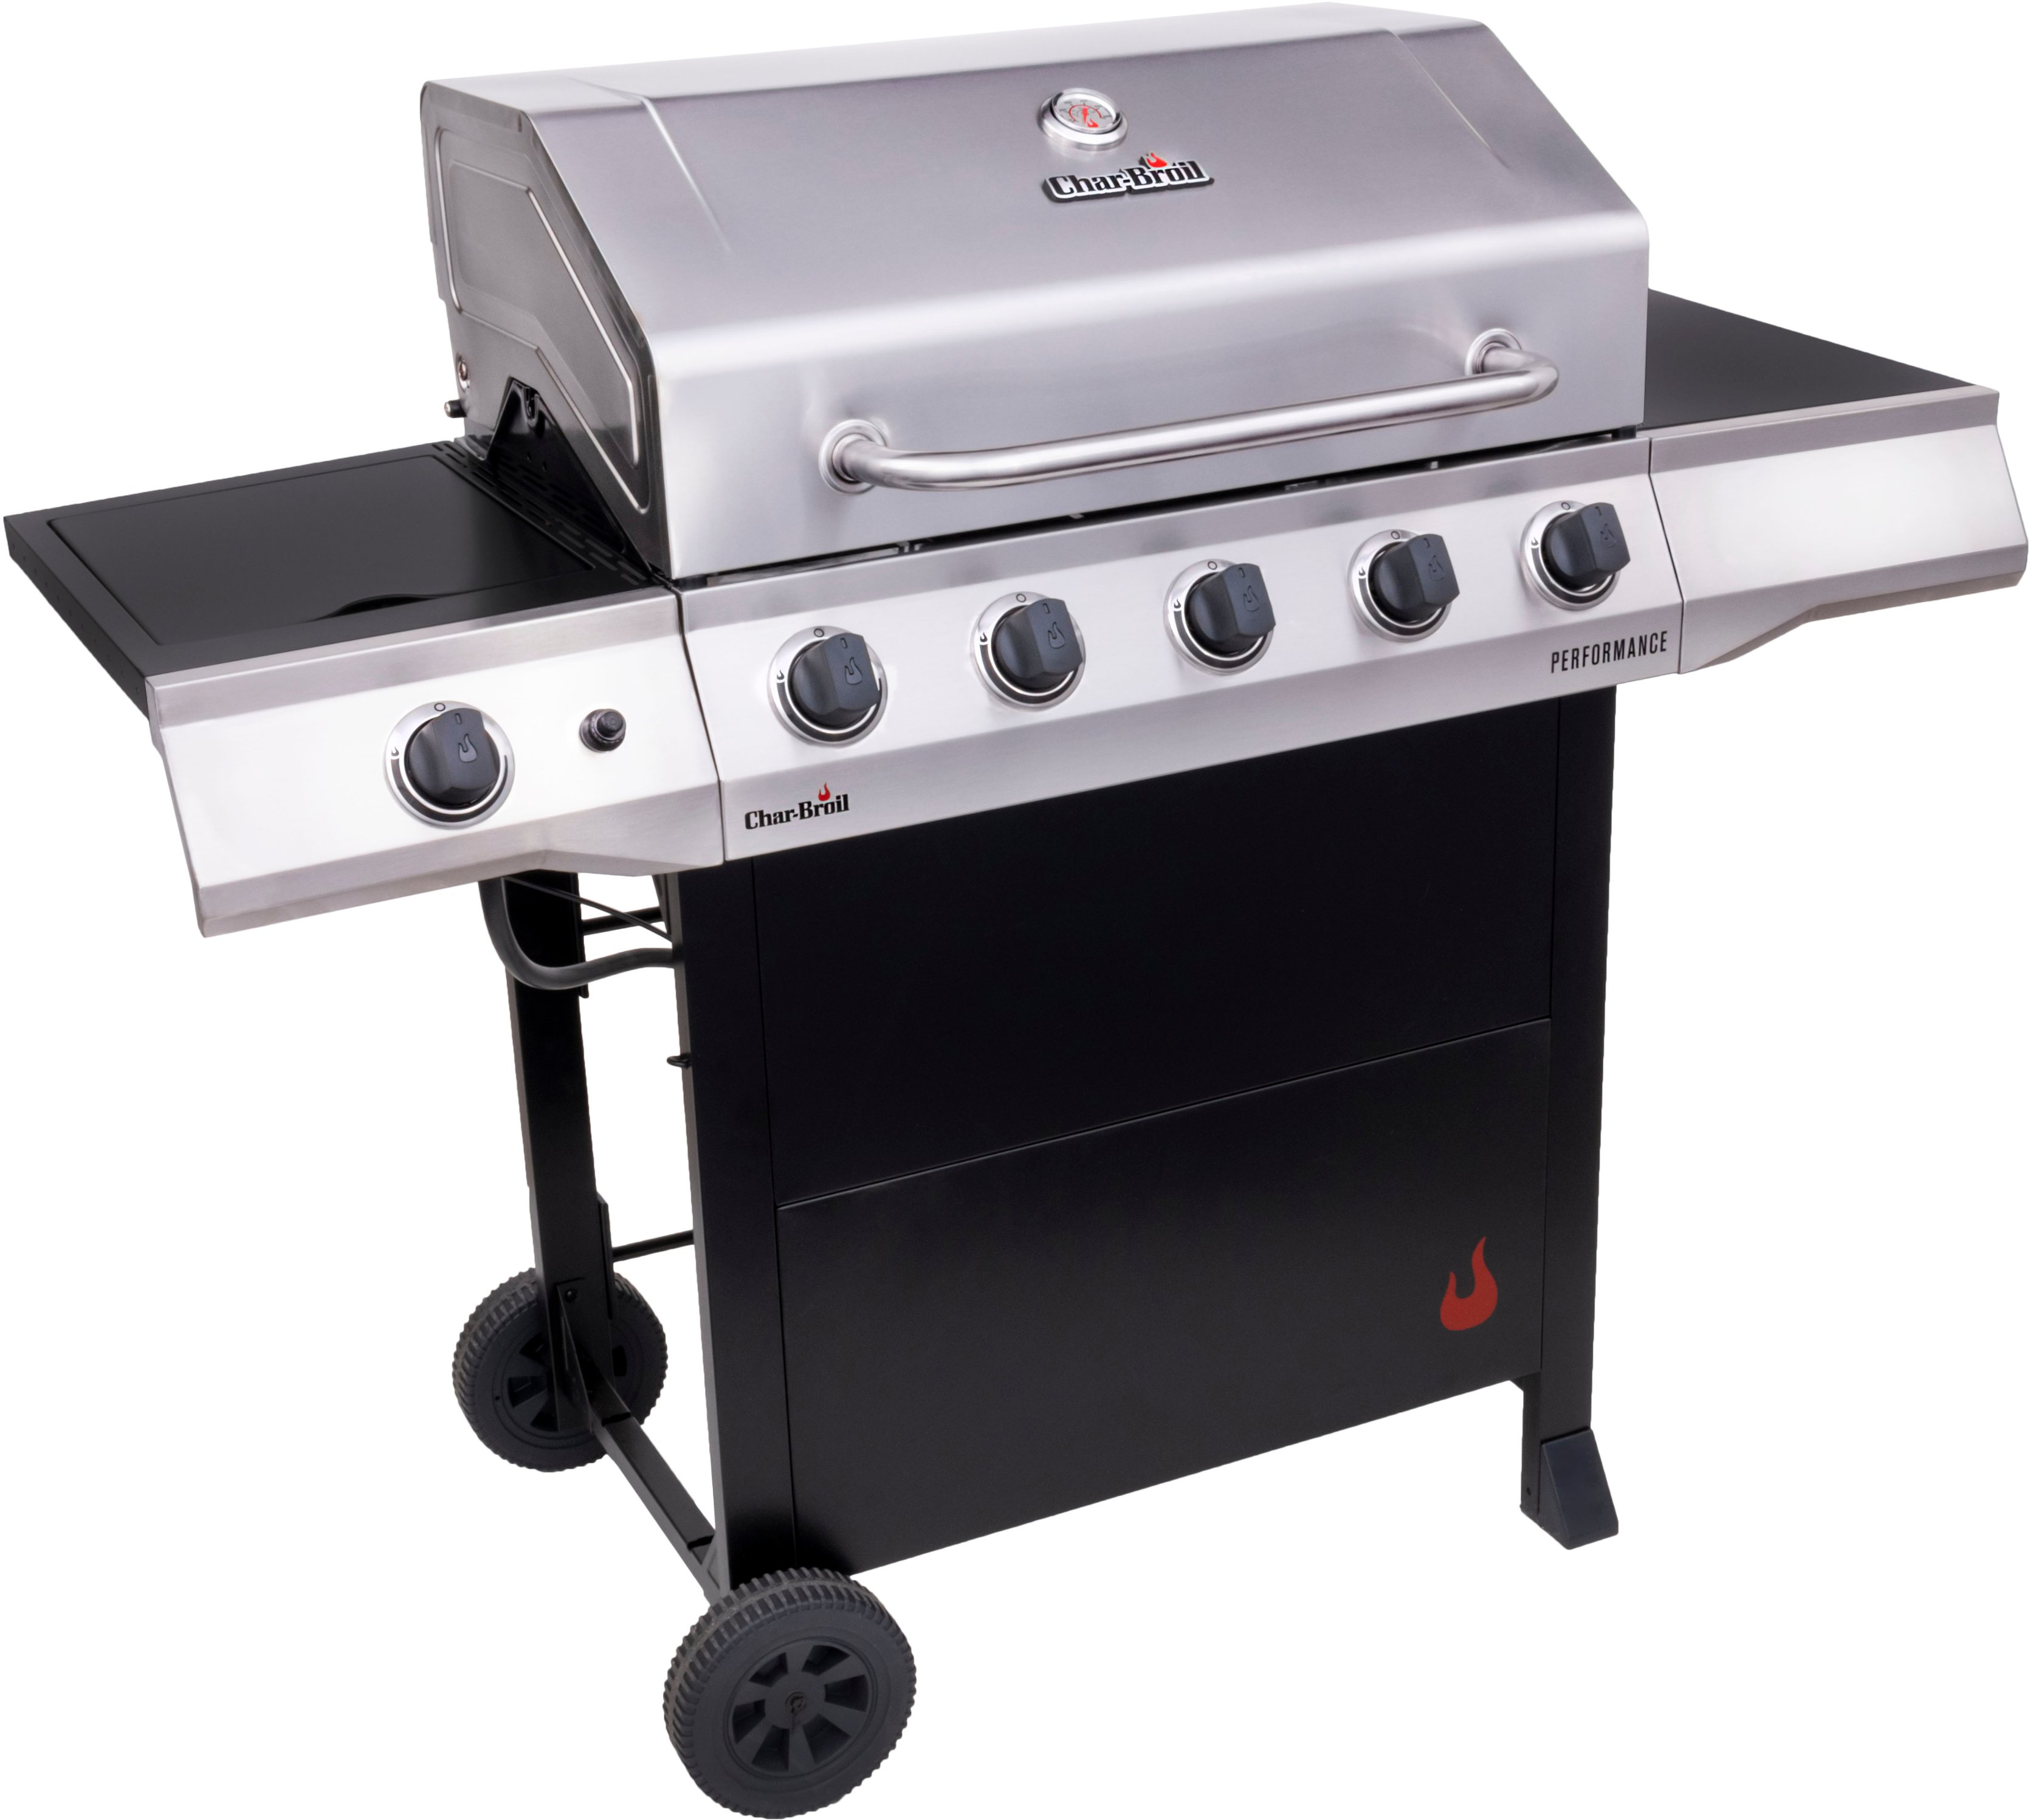 Little Griddle Professional Series Stainless Steel BBQ Griddle, Silver